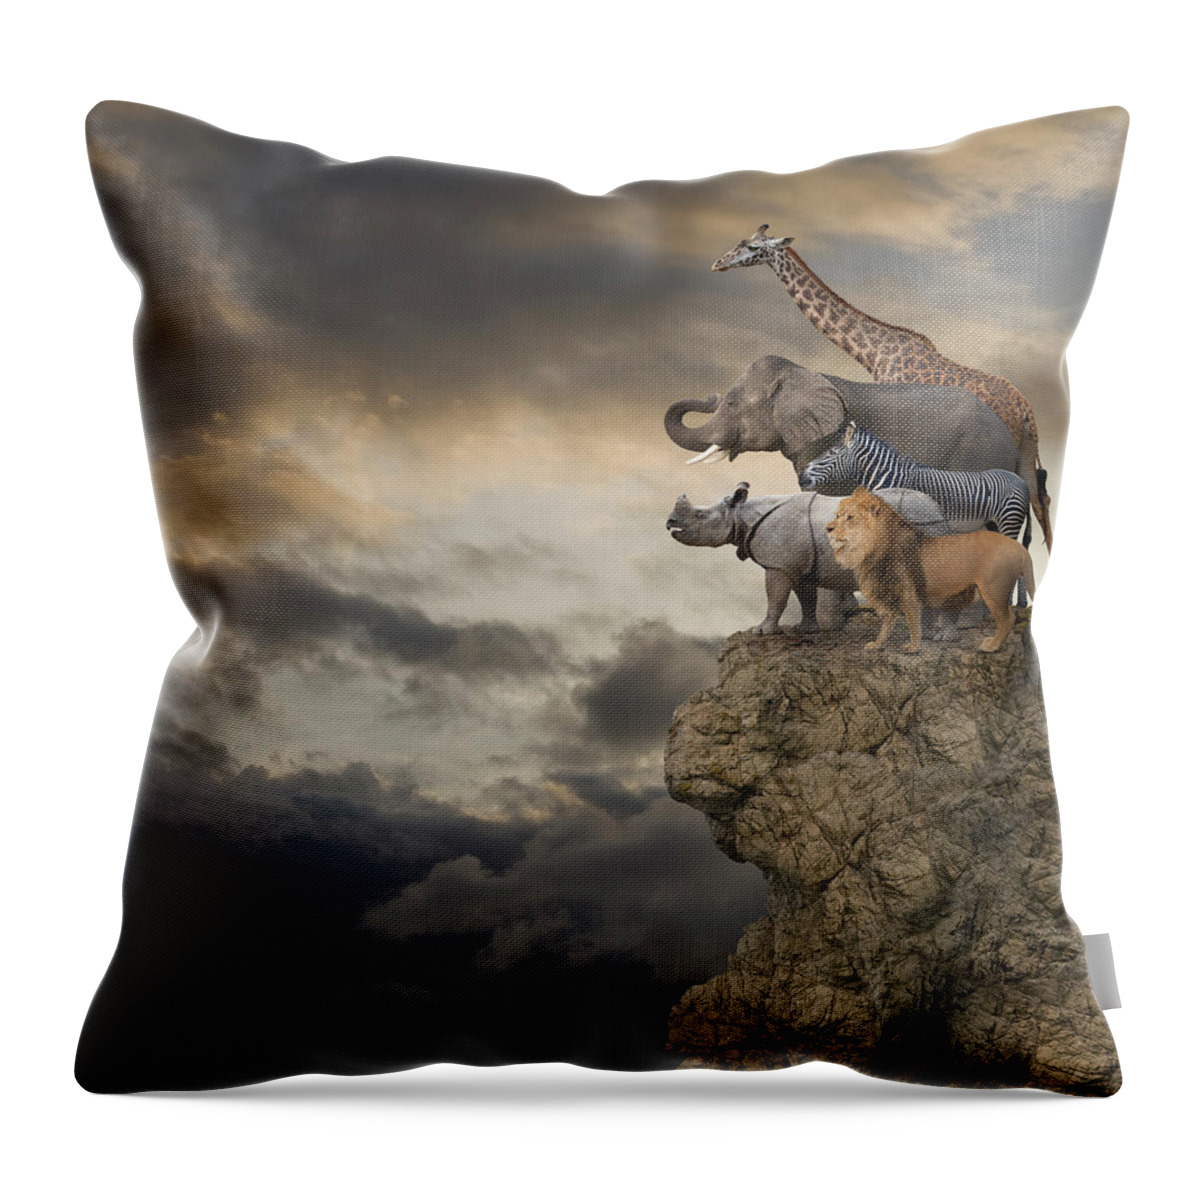 Risk Throw Pillow featuring the photograph African Animals On The Edge Of A Cliff by John Lund